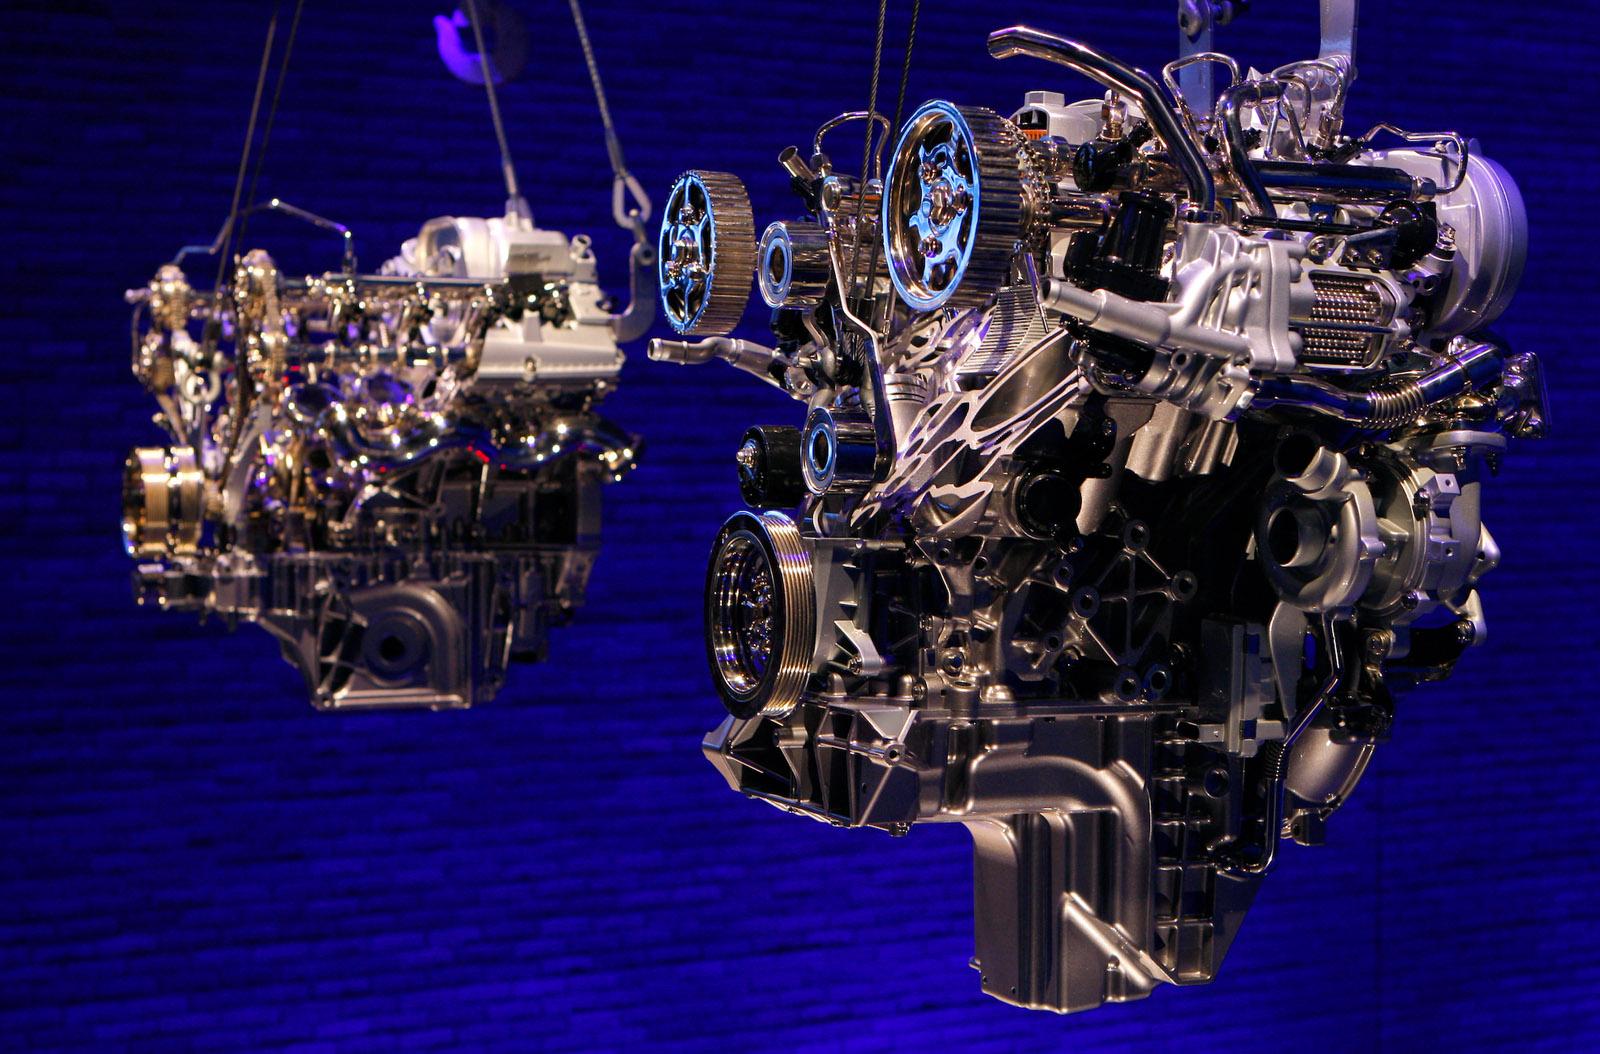 a close look at Land Rover's TDV6 diesel engine